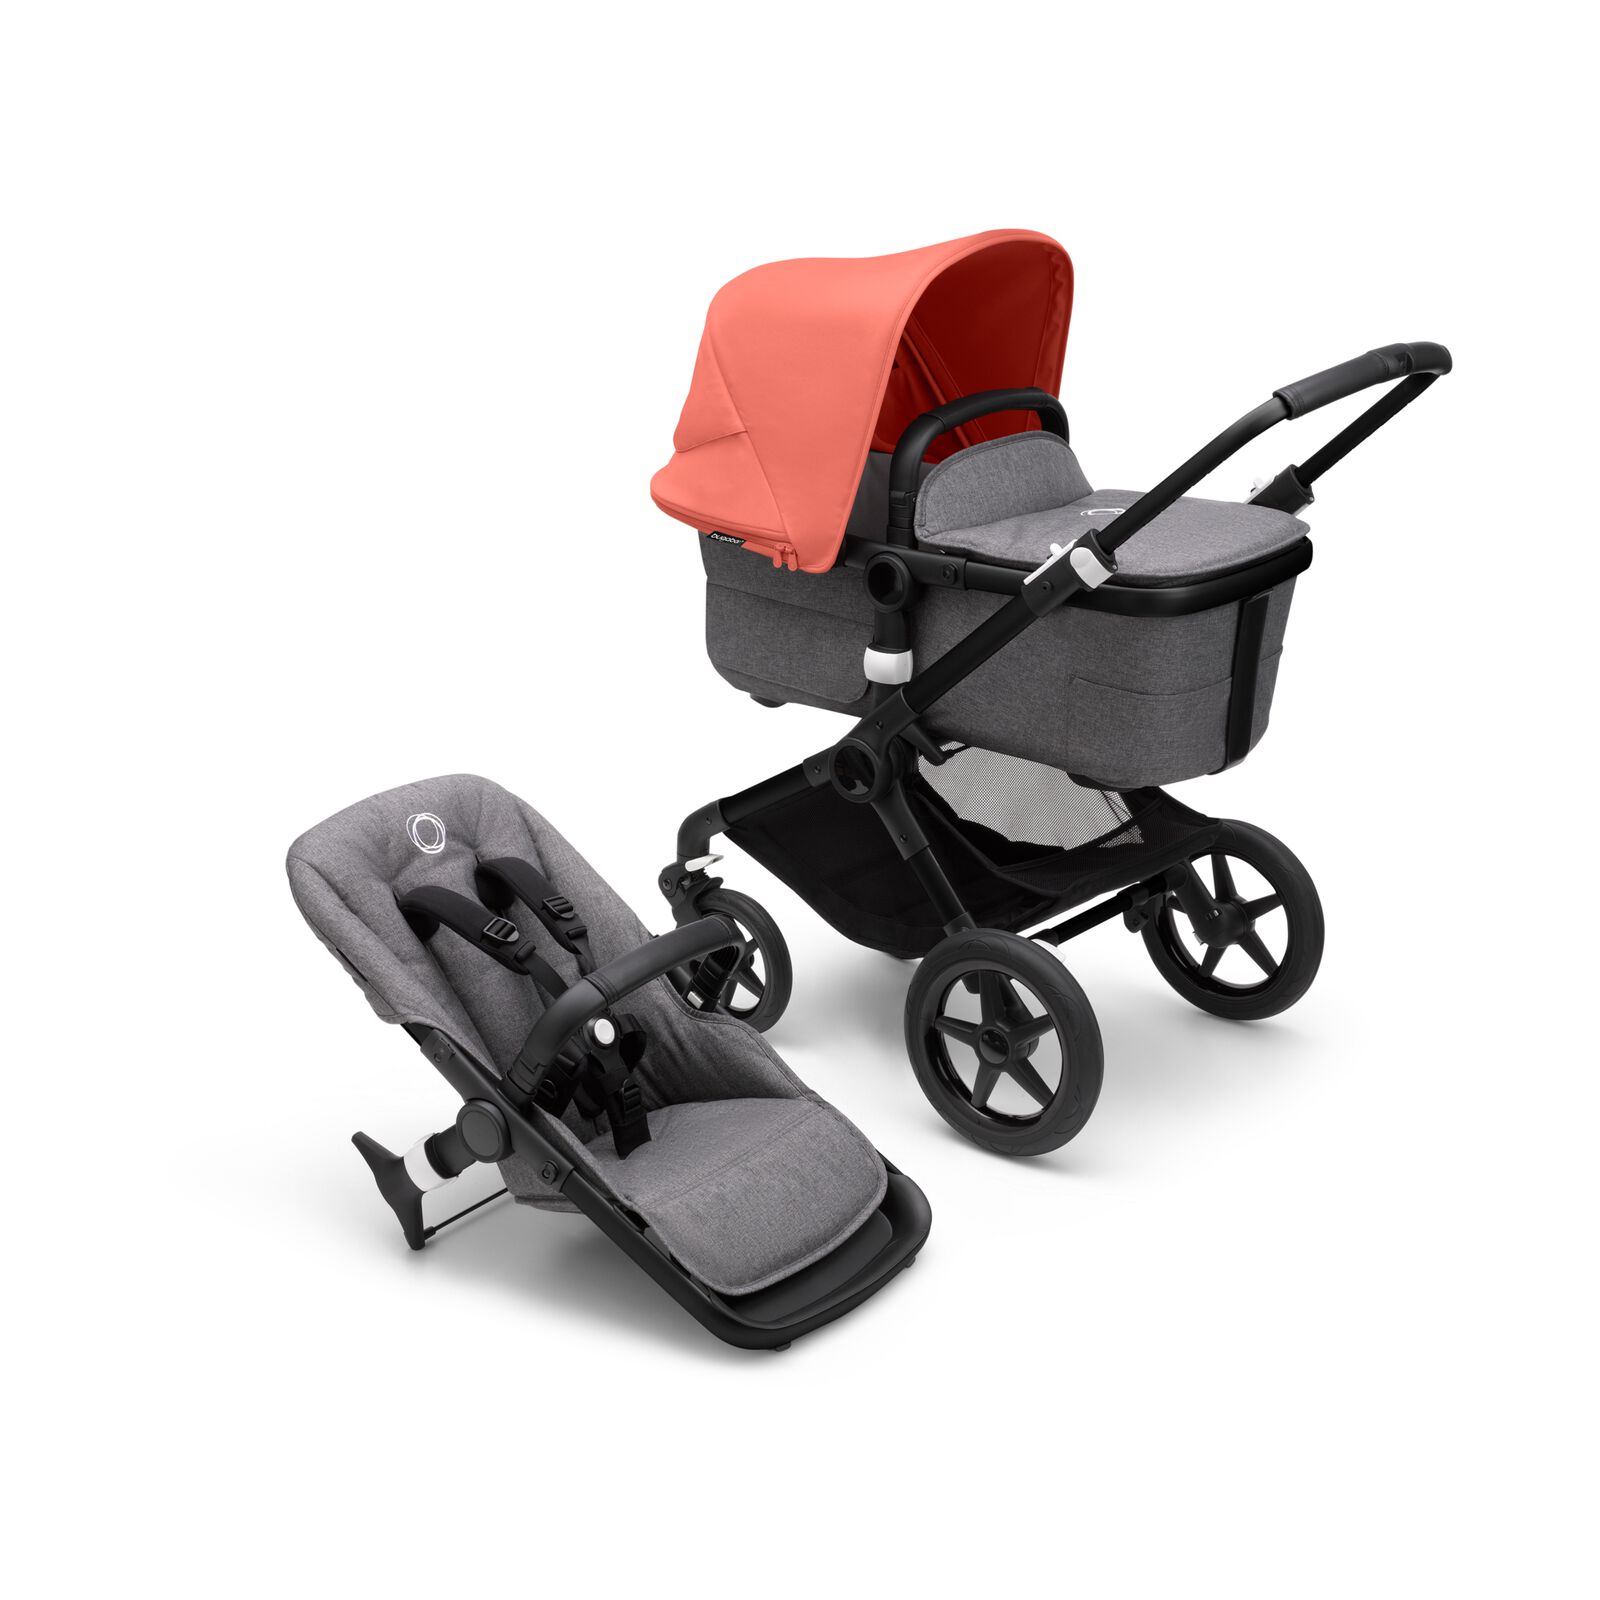 Bugaboo Fox 3 bassinet and seat stroller with black frame, grey melange fabrics, and red sun canopy.